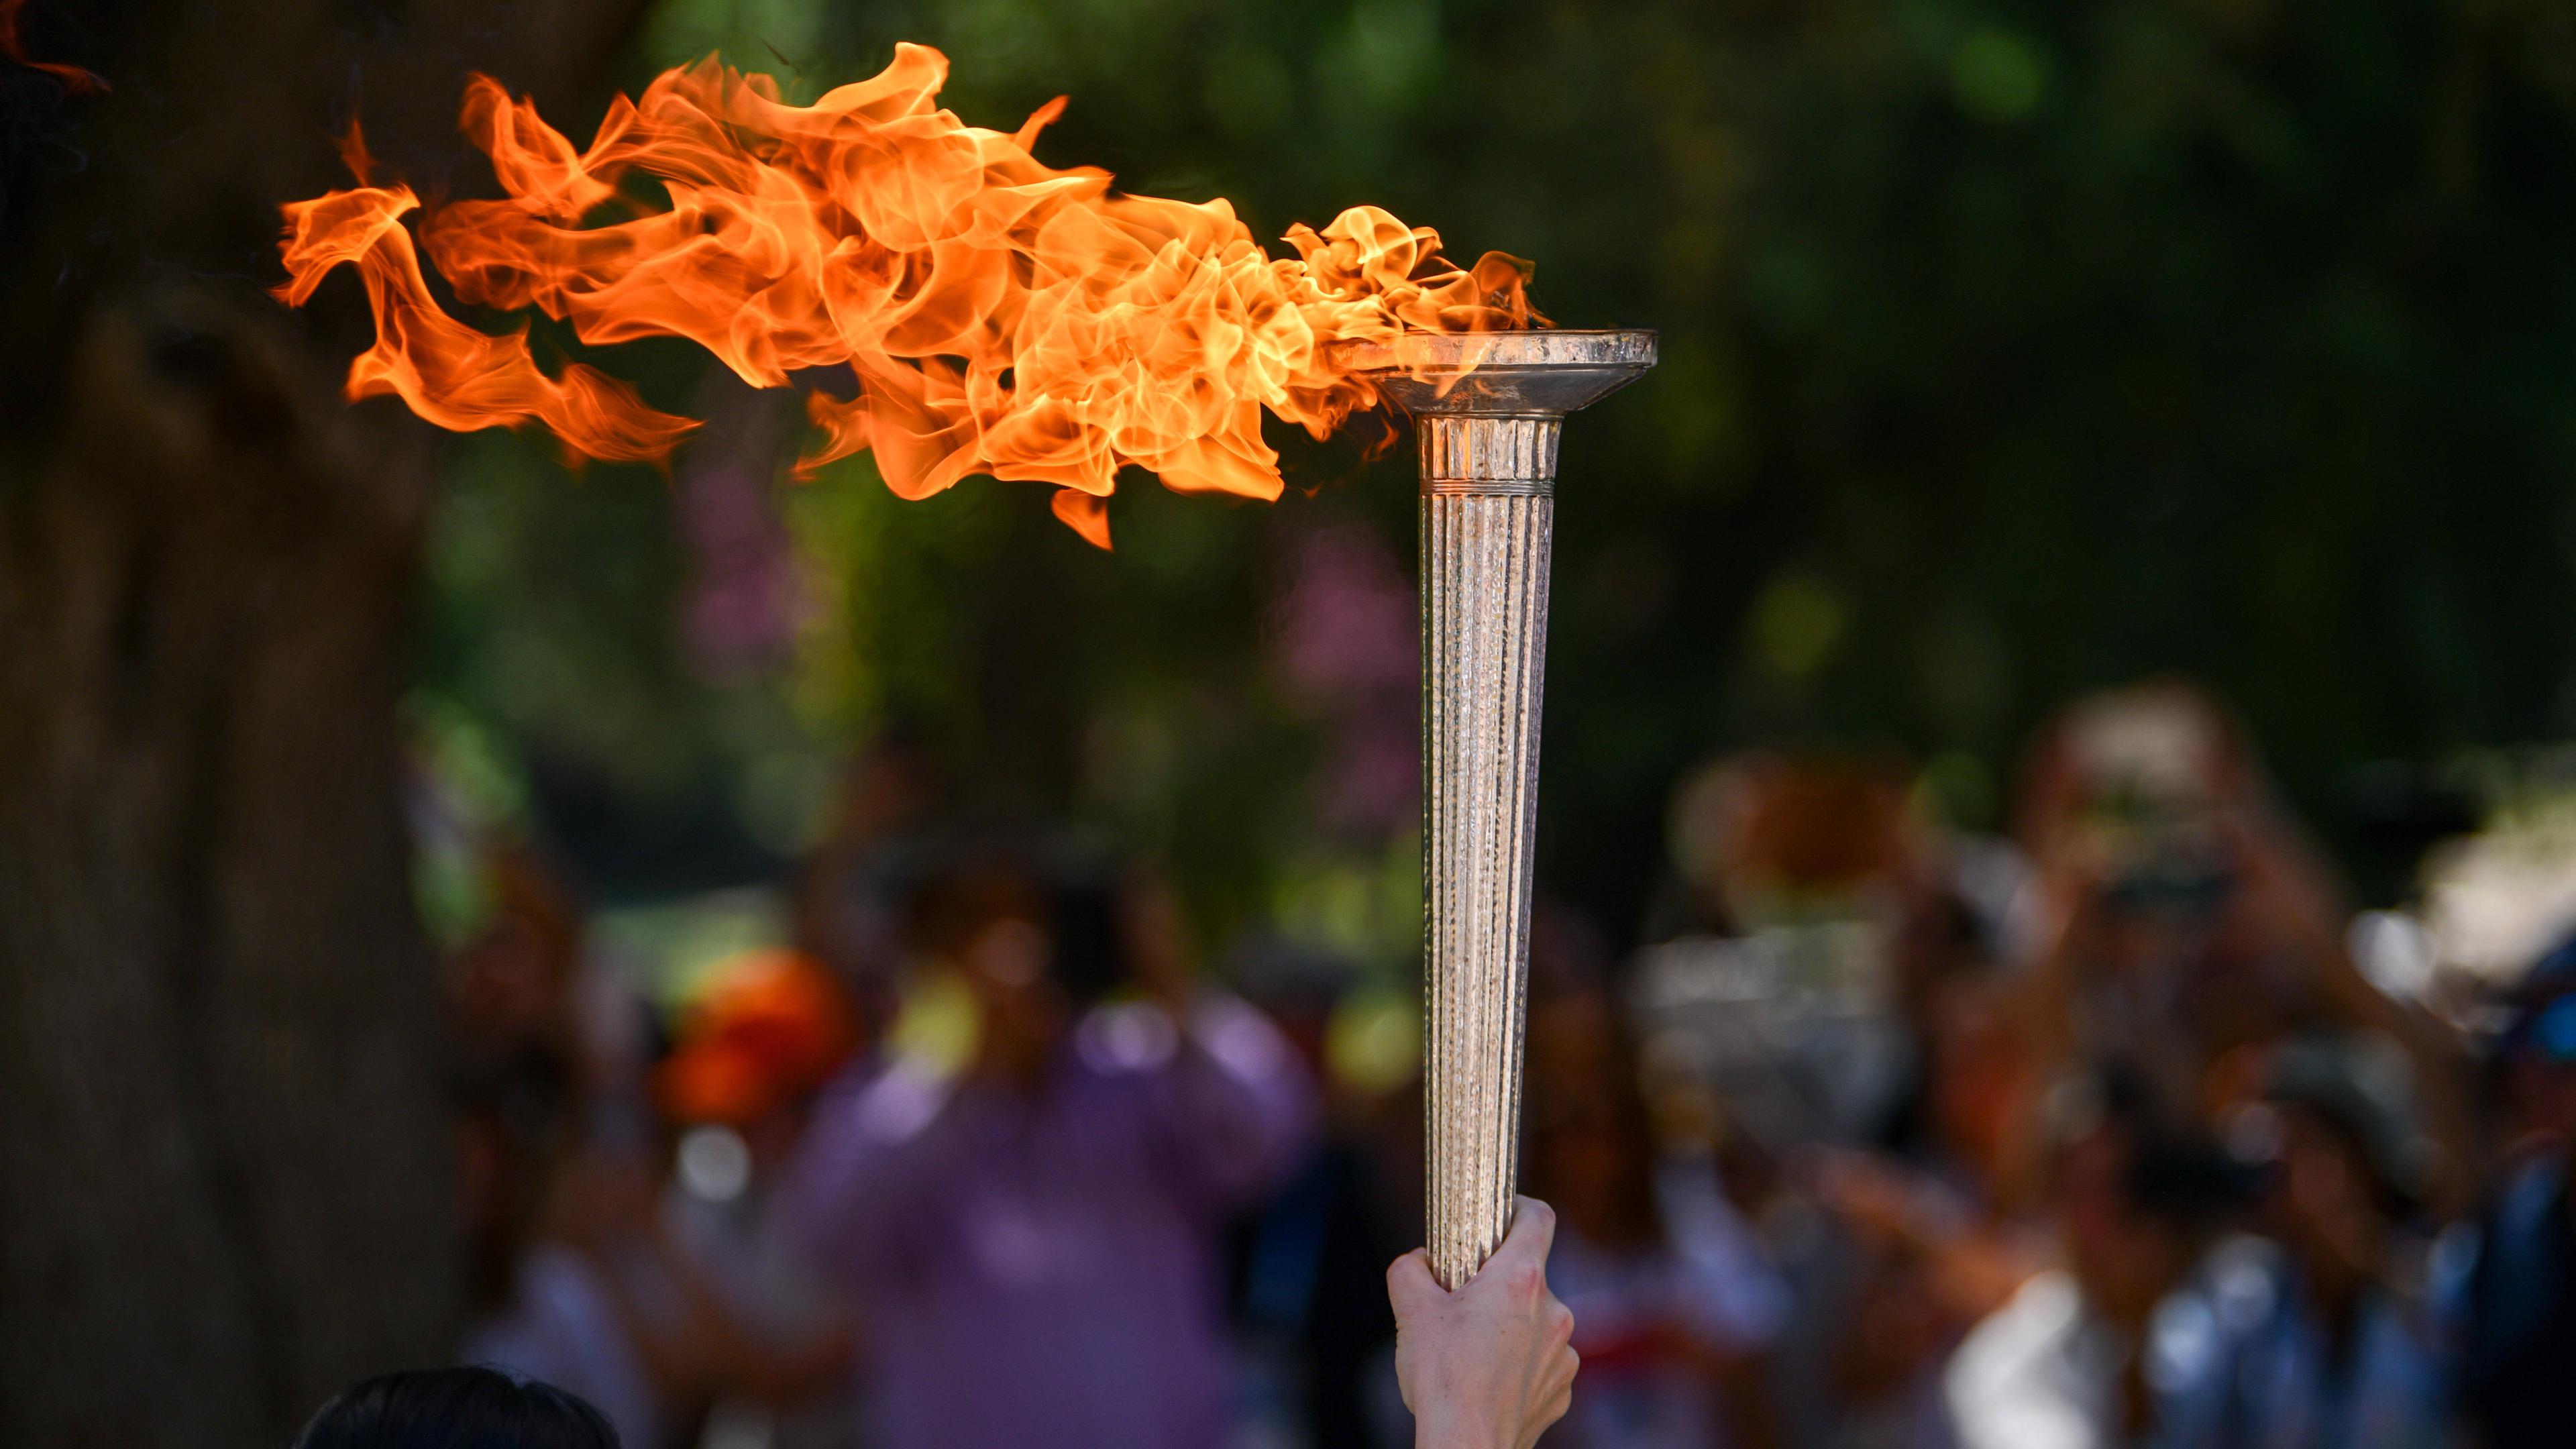 The Olympic Flame is carried by the first torchbearer Greek Rowing Olympic Champion Stefanos Ntouskos not visible during the rehearsal performance of lighting the Olympic Flame ceremony